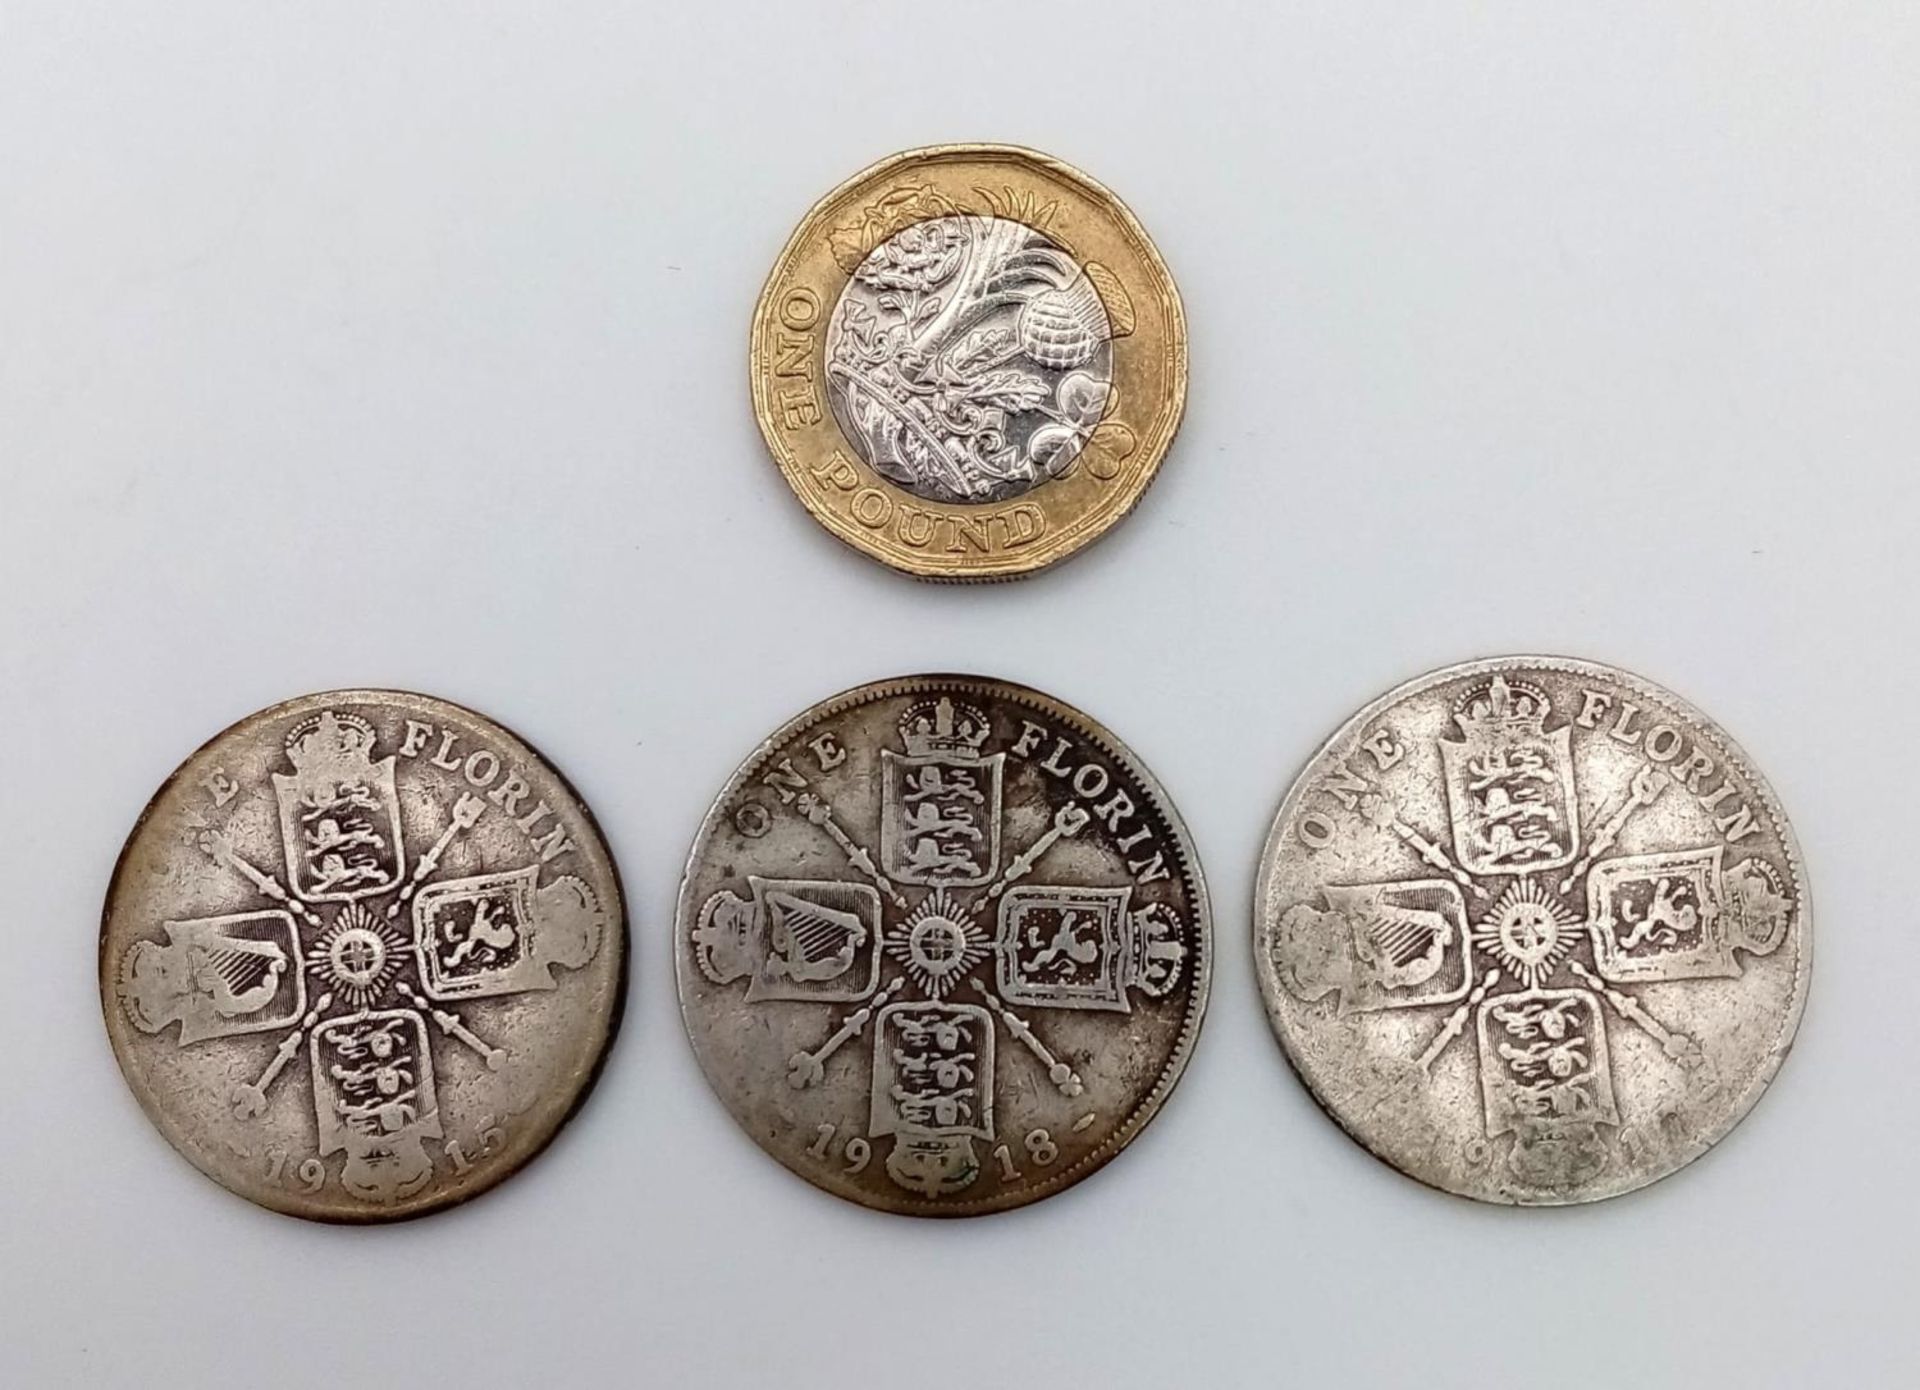 Three 1918 George V Silver Florin Coins. 1910,15 and 18. Please see photos for conditions. - Image 2 of 2